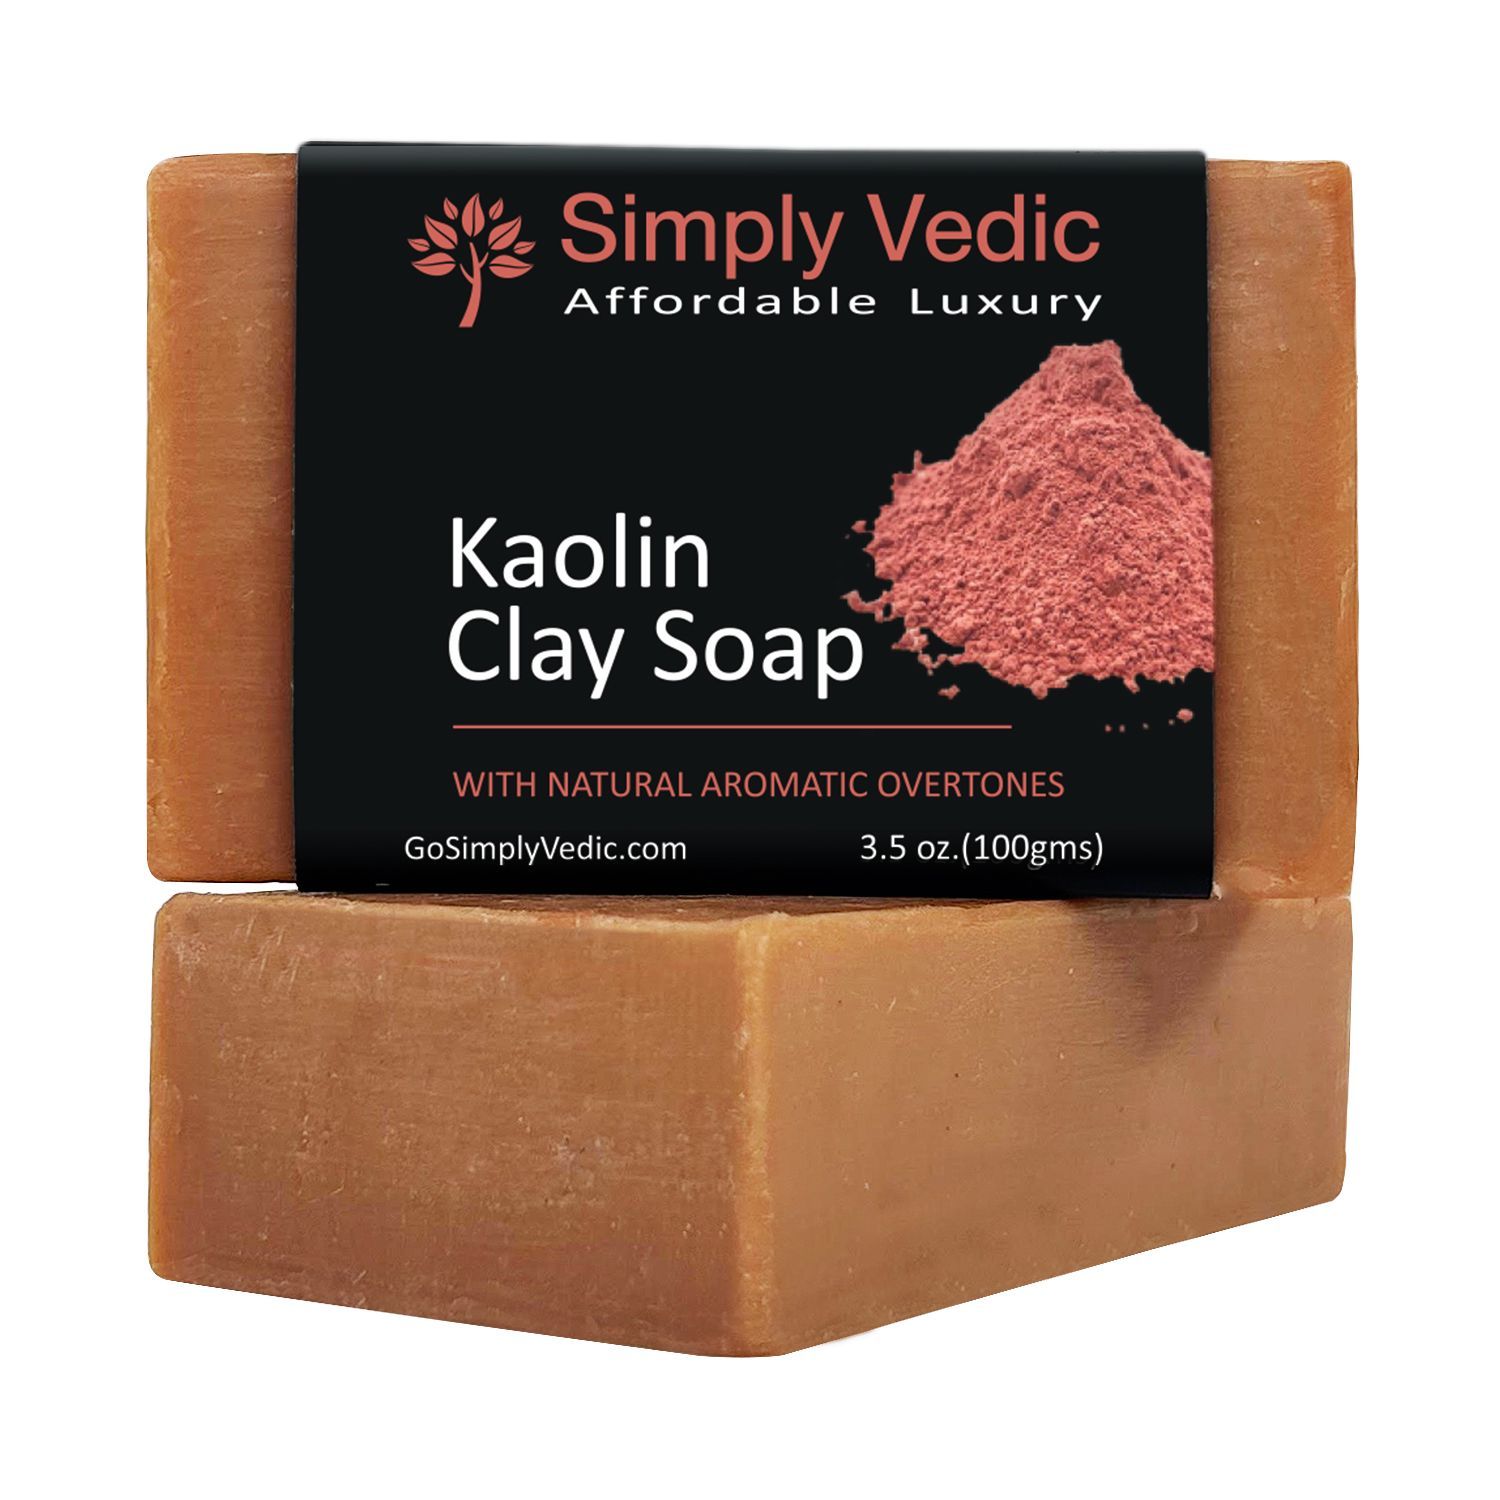 Simply Vedic Kaolin Clay Soap Bar For Body, Hand, Face. 100% Vegan Cold Pressed With Coconut Oil, Hand-Made.